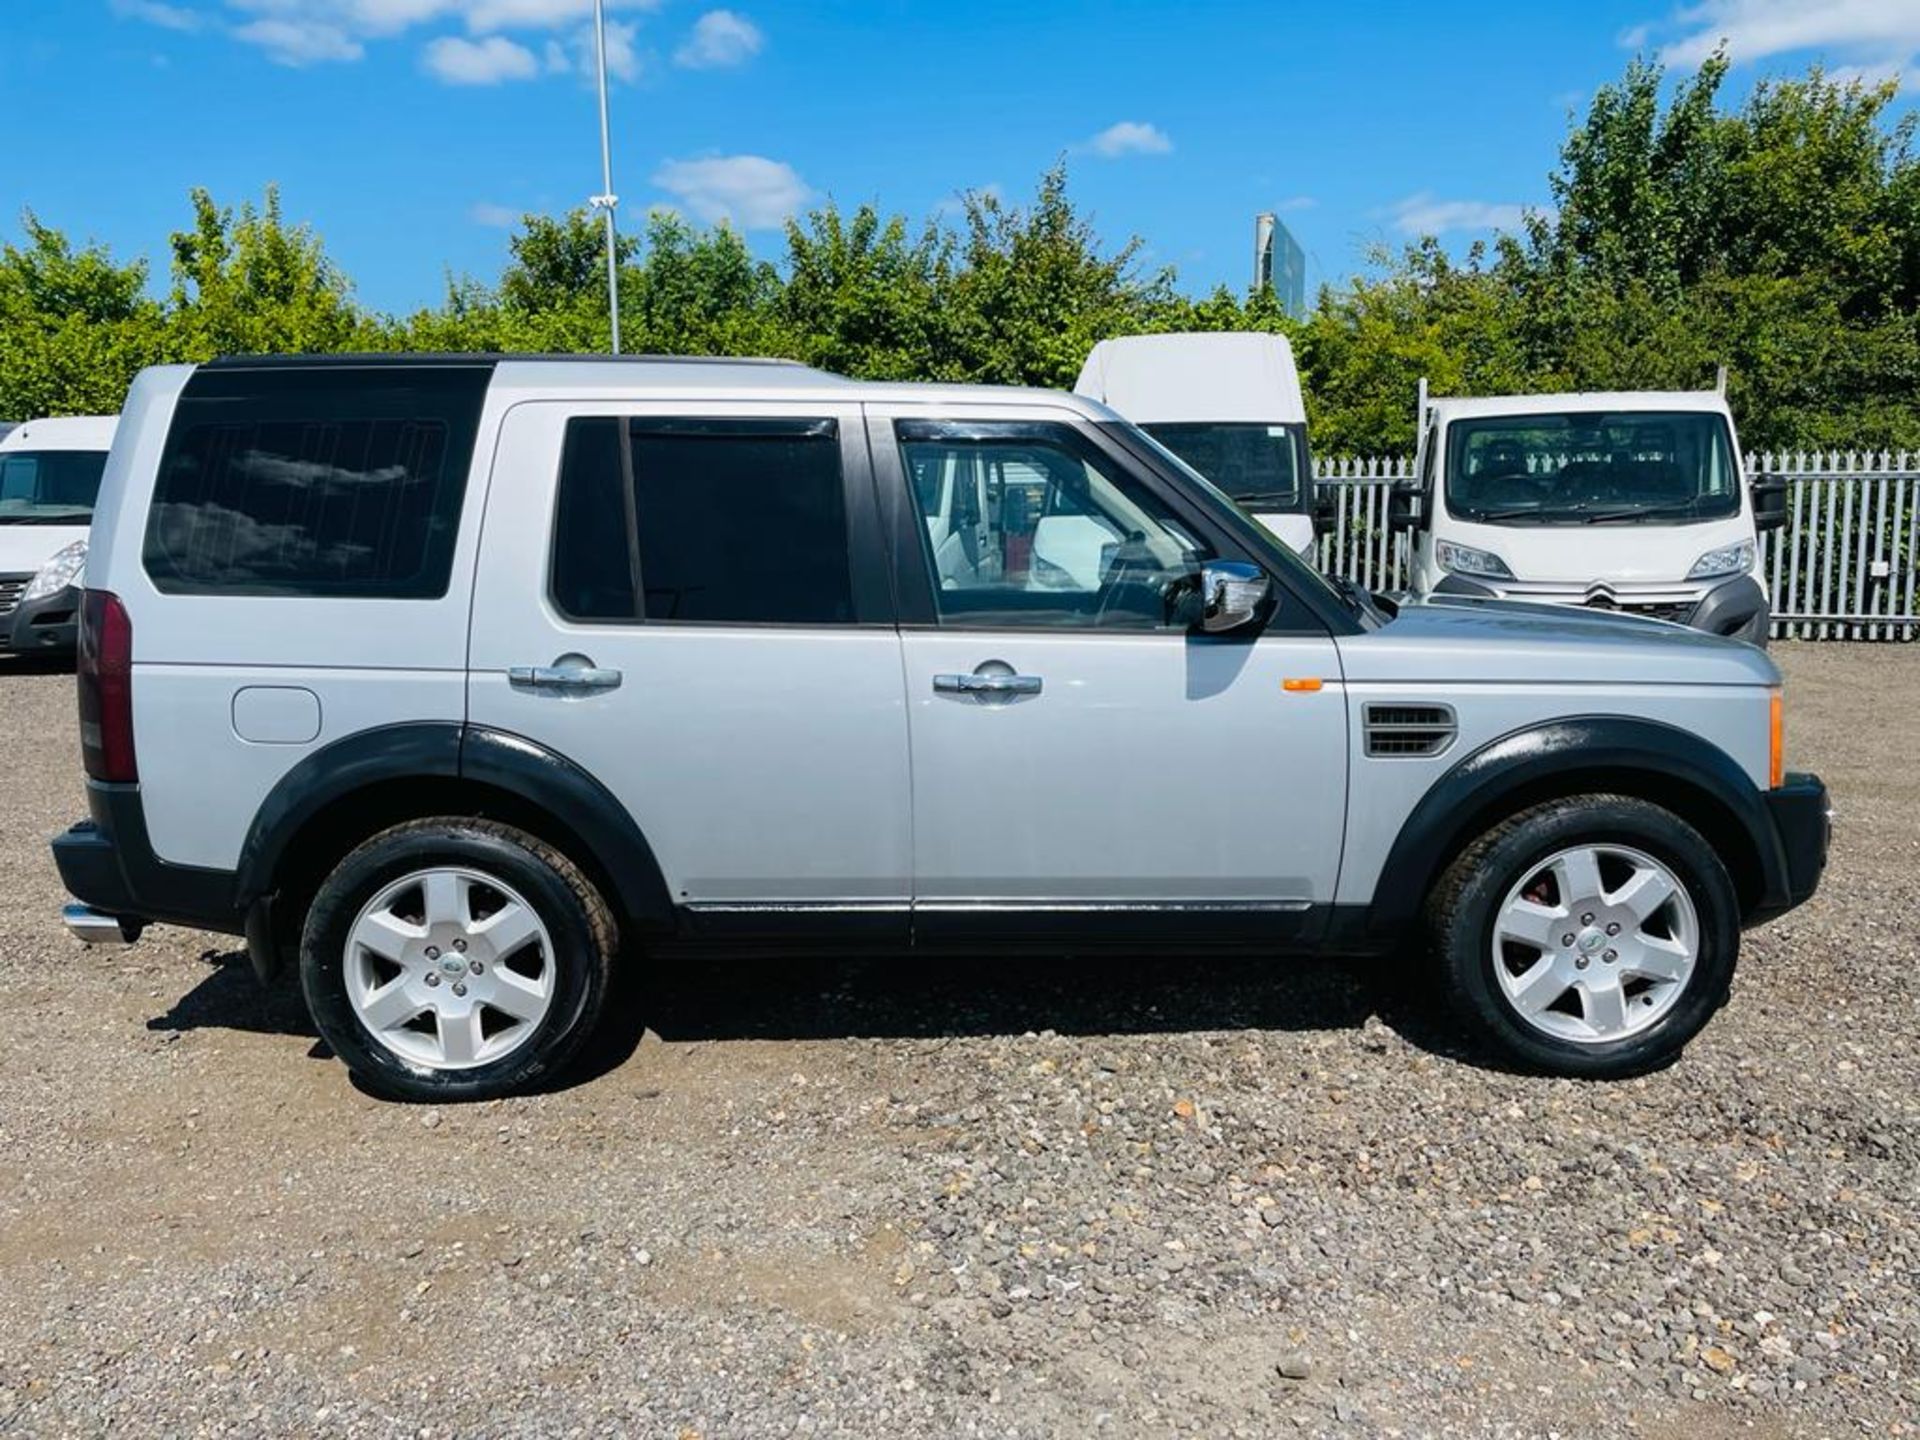 ** ON SALE ** Land Rover Discovery 3 TDV6 HSE Auto 190 2007 '07 Reg' 7 seater - Sat Nav - A/C - Image 4 of 30